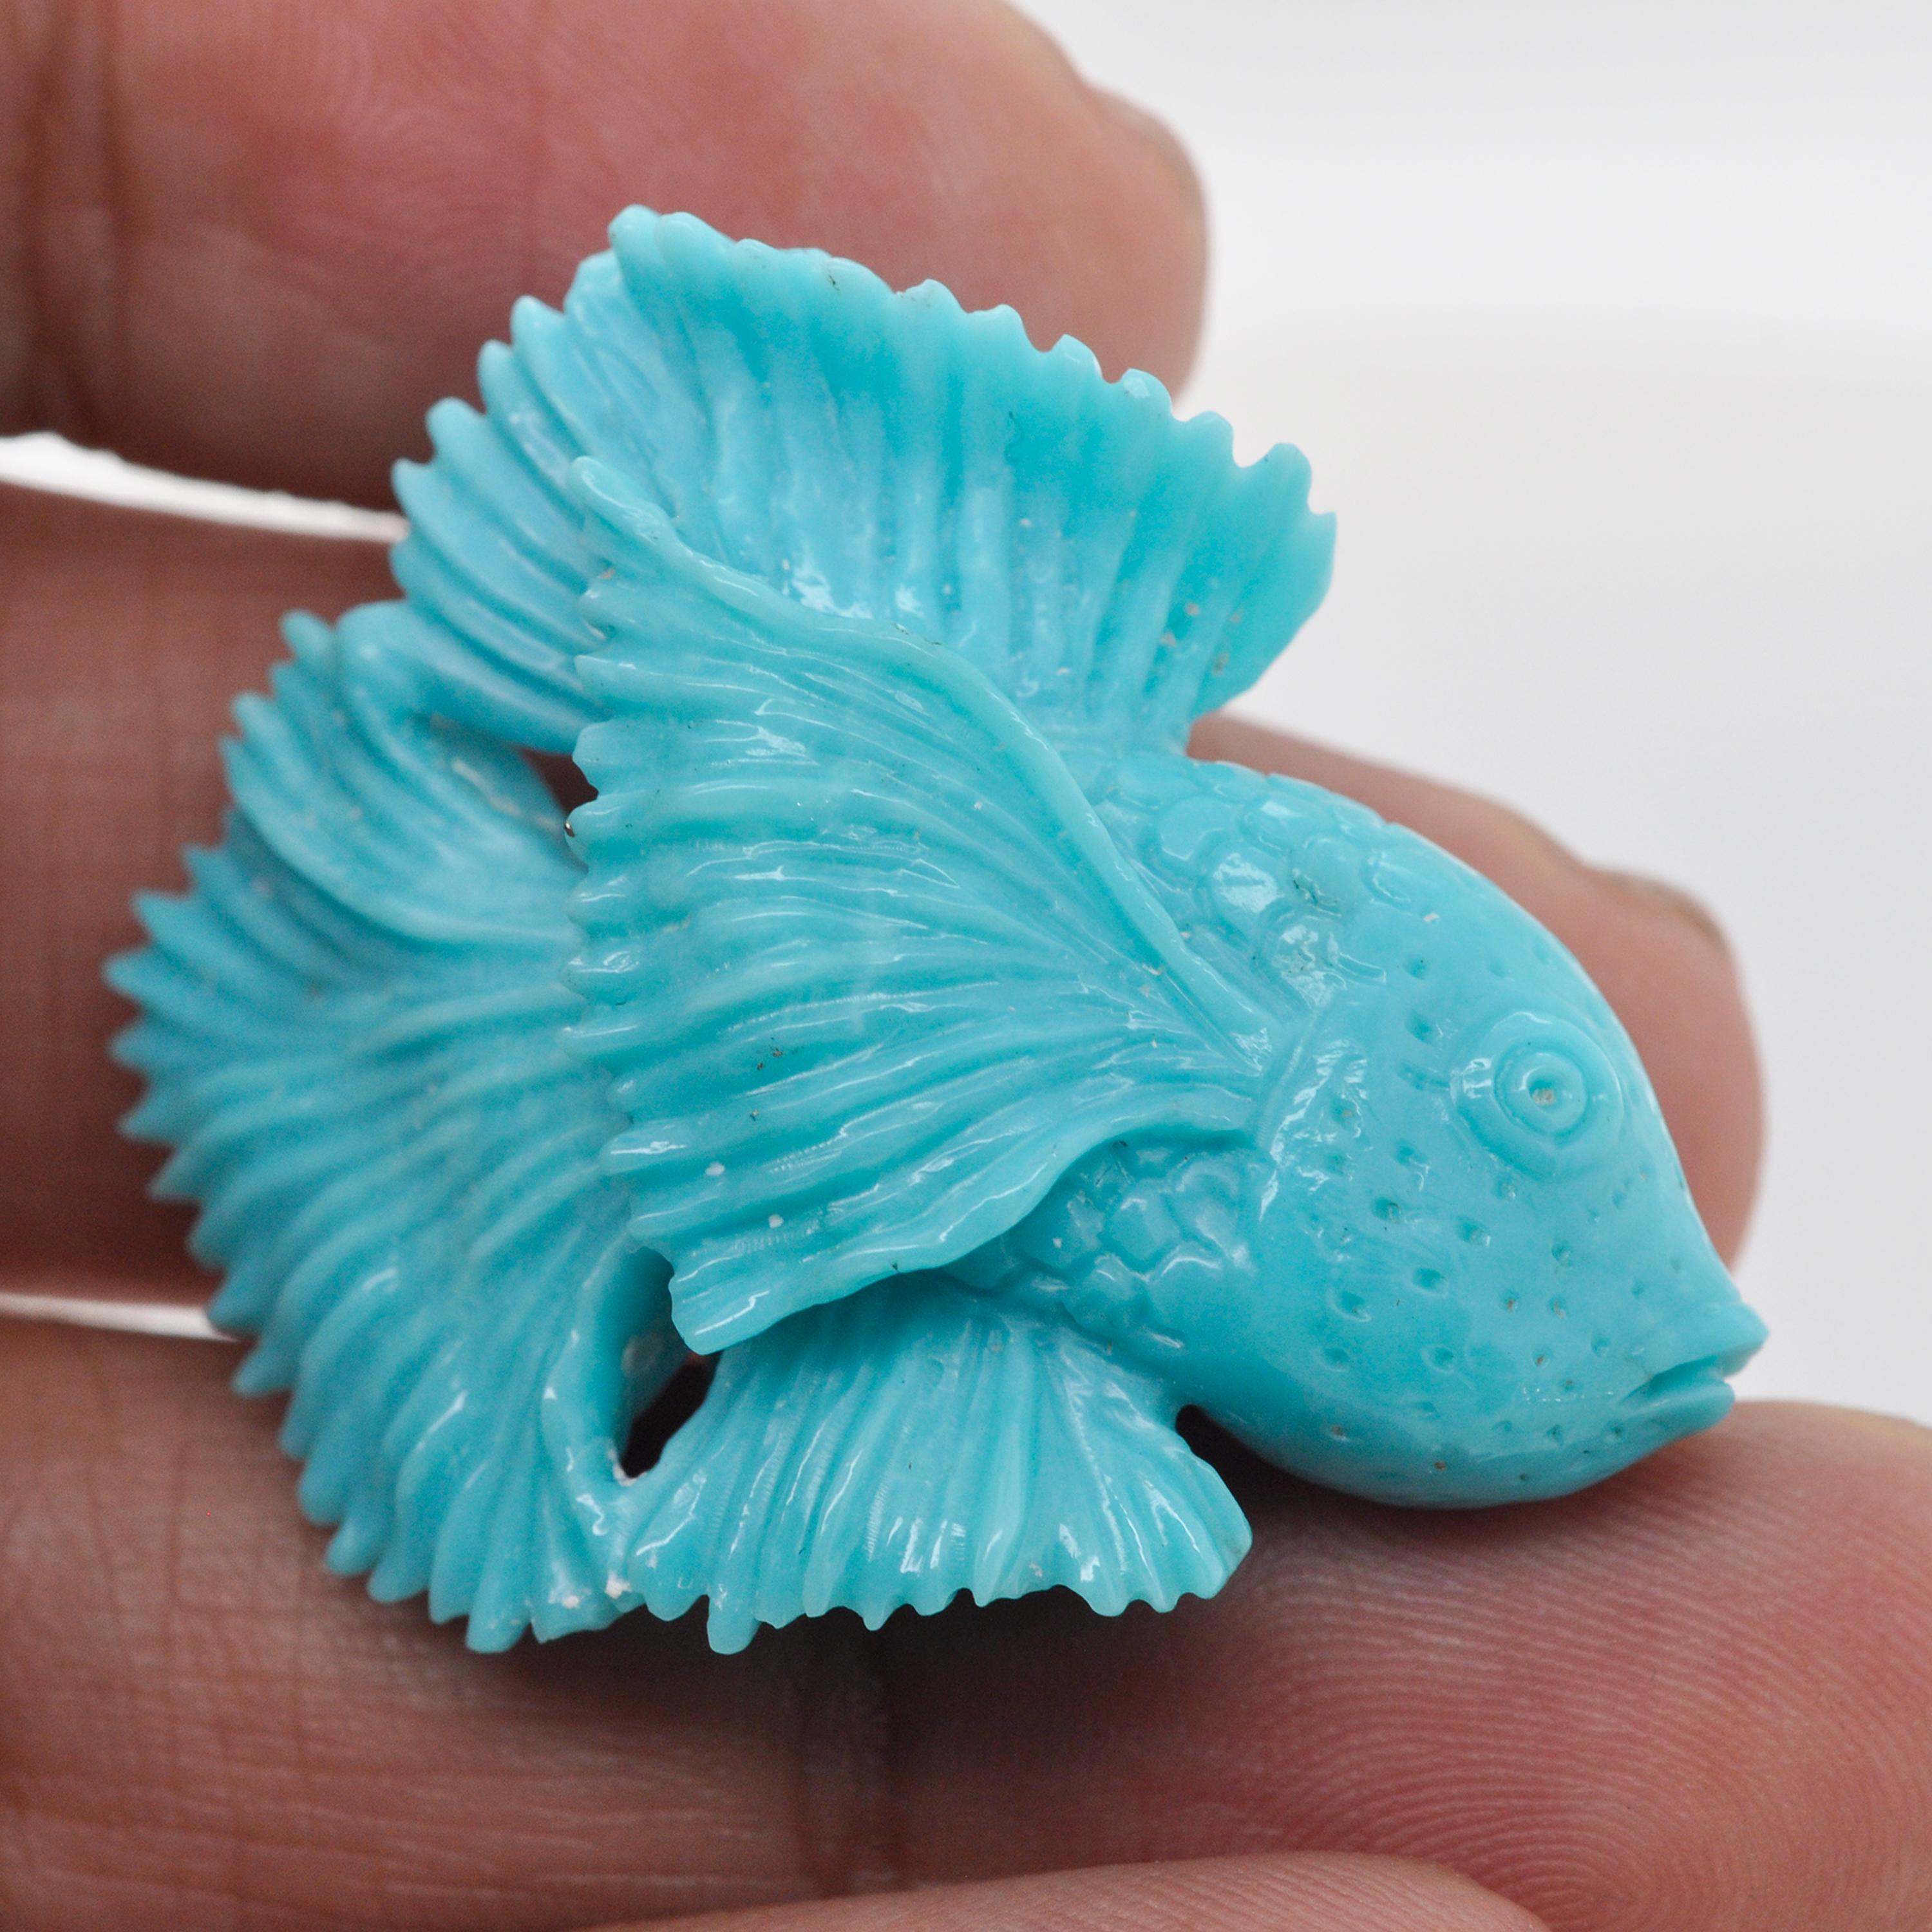 Our one-of-a-kind hand-carved Siamese fish on natural Arizona Turquoise is an extraordinary work of art created by our expert lapidary artist in Jaipur. With unparalleled skill and meticulous attention to detail, the lapidary artist has transformed